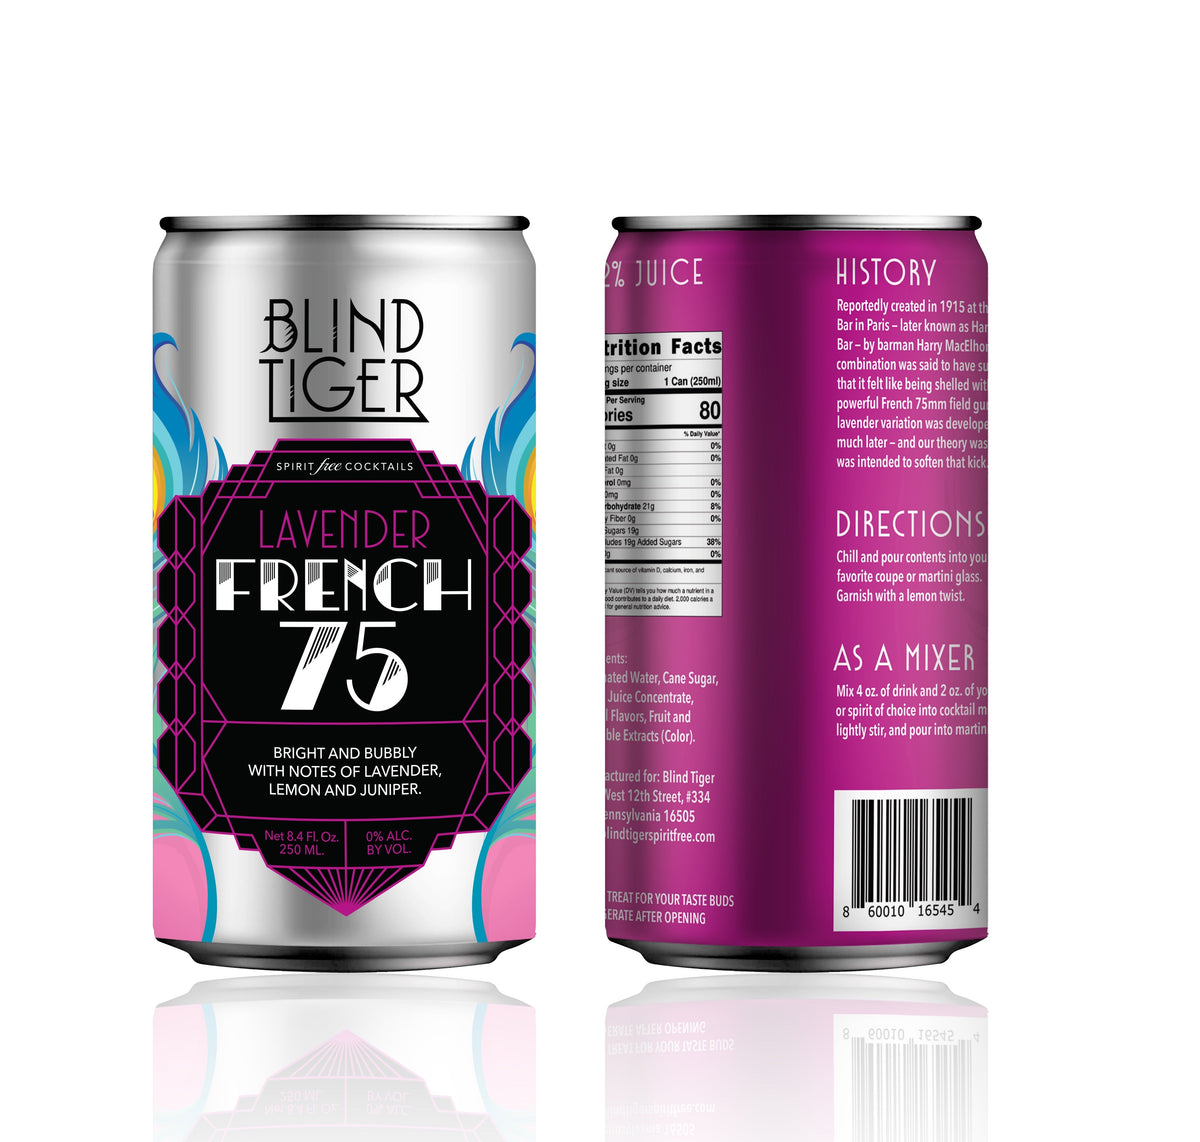 Lavender French 75 Slim Can 4-pack (33.6 oz) by Blind Tiger Spirit-Free